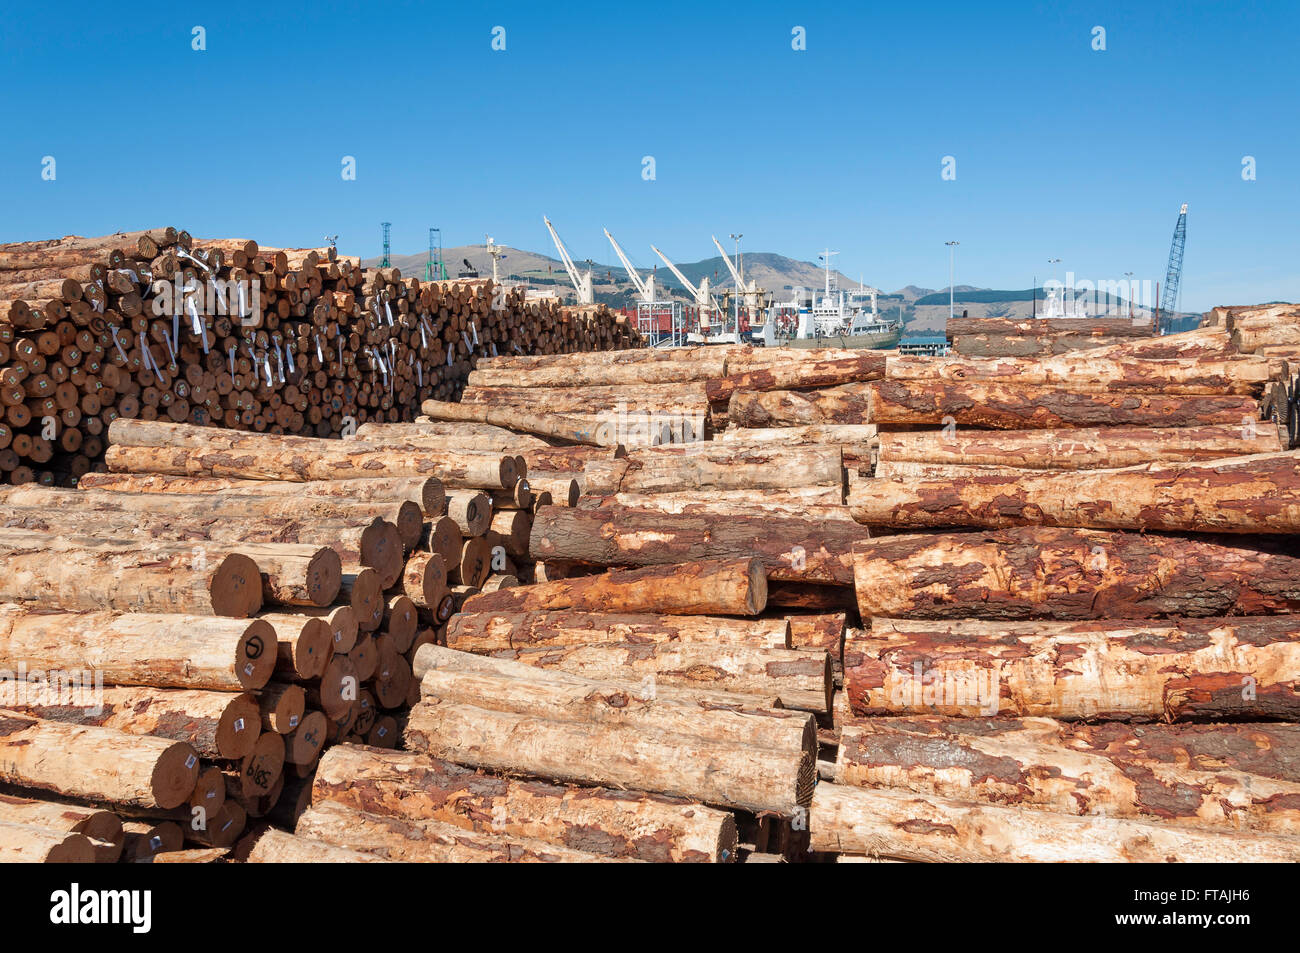 Piles of logs ready for loading at Container Port, Lyttelton Harbour, Lyttelton, Banks Peninsula, Canterbury, New Zealand Stock Photo